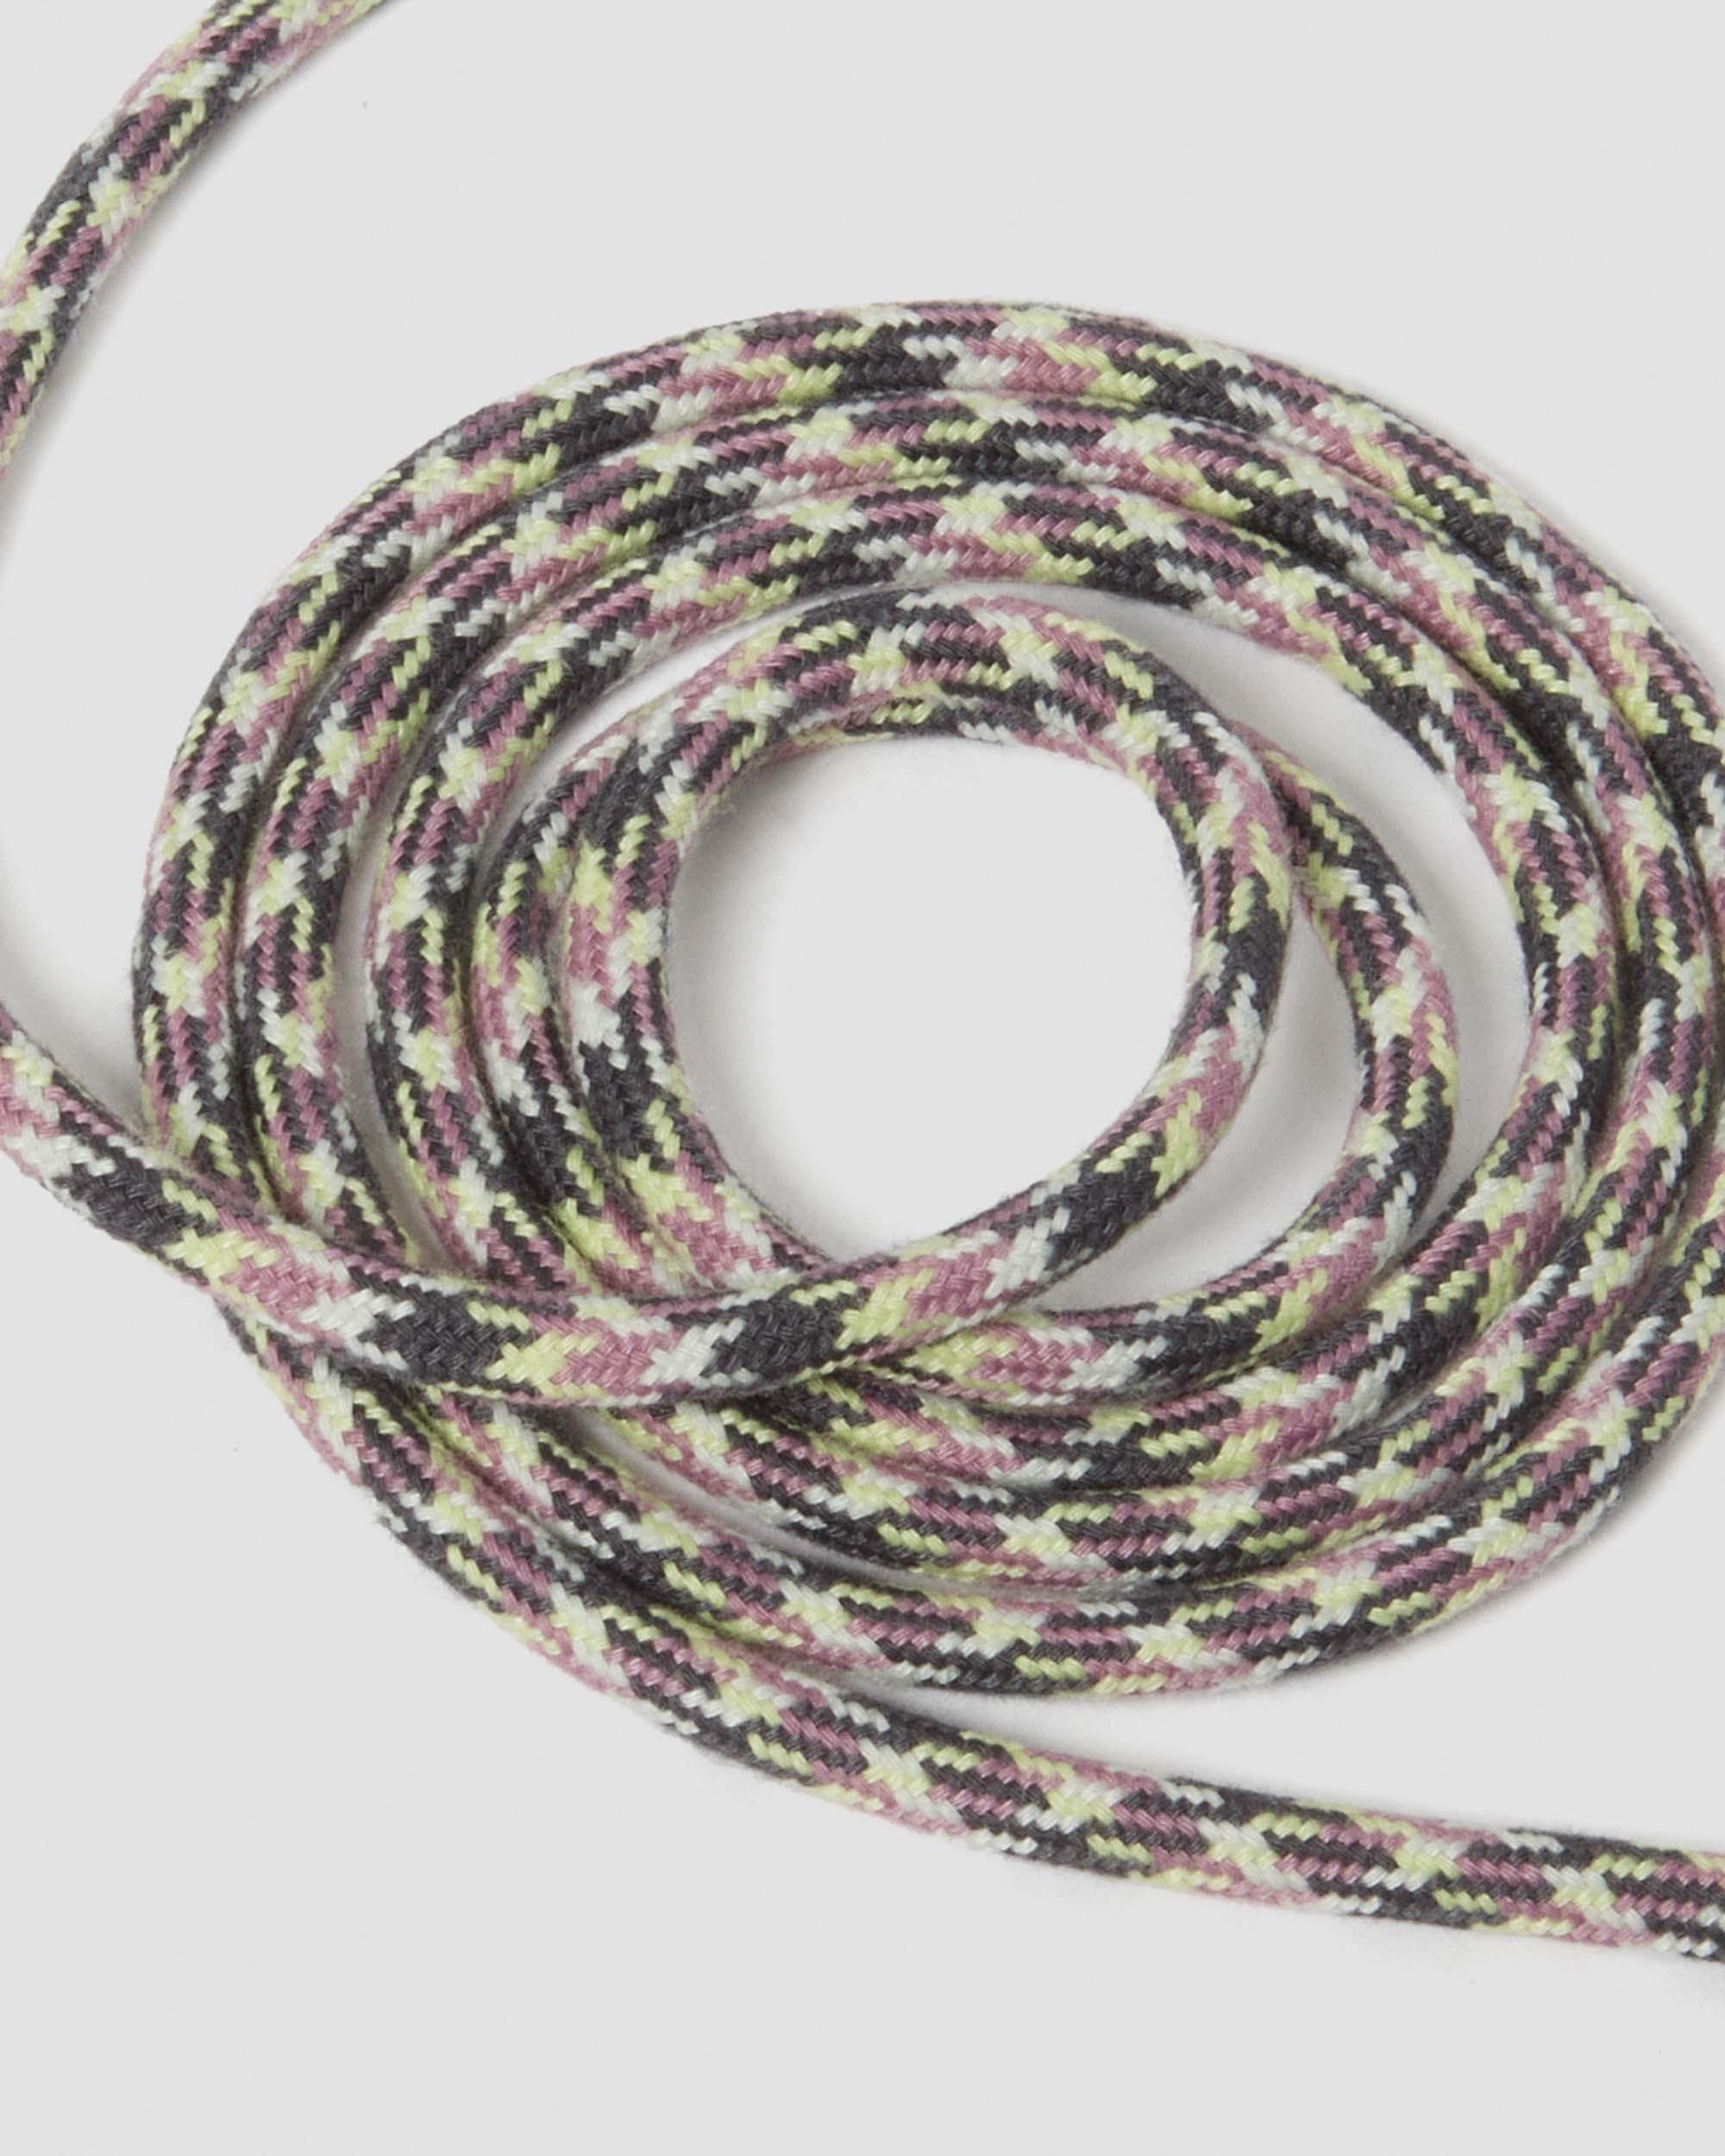 55 Inch Round Jungle Shoe Lace (8-10 Eye) in Muted Purple